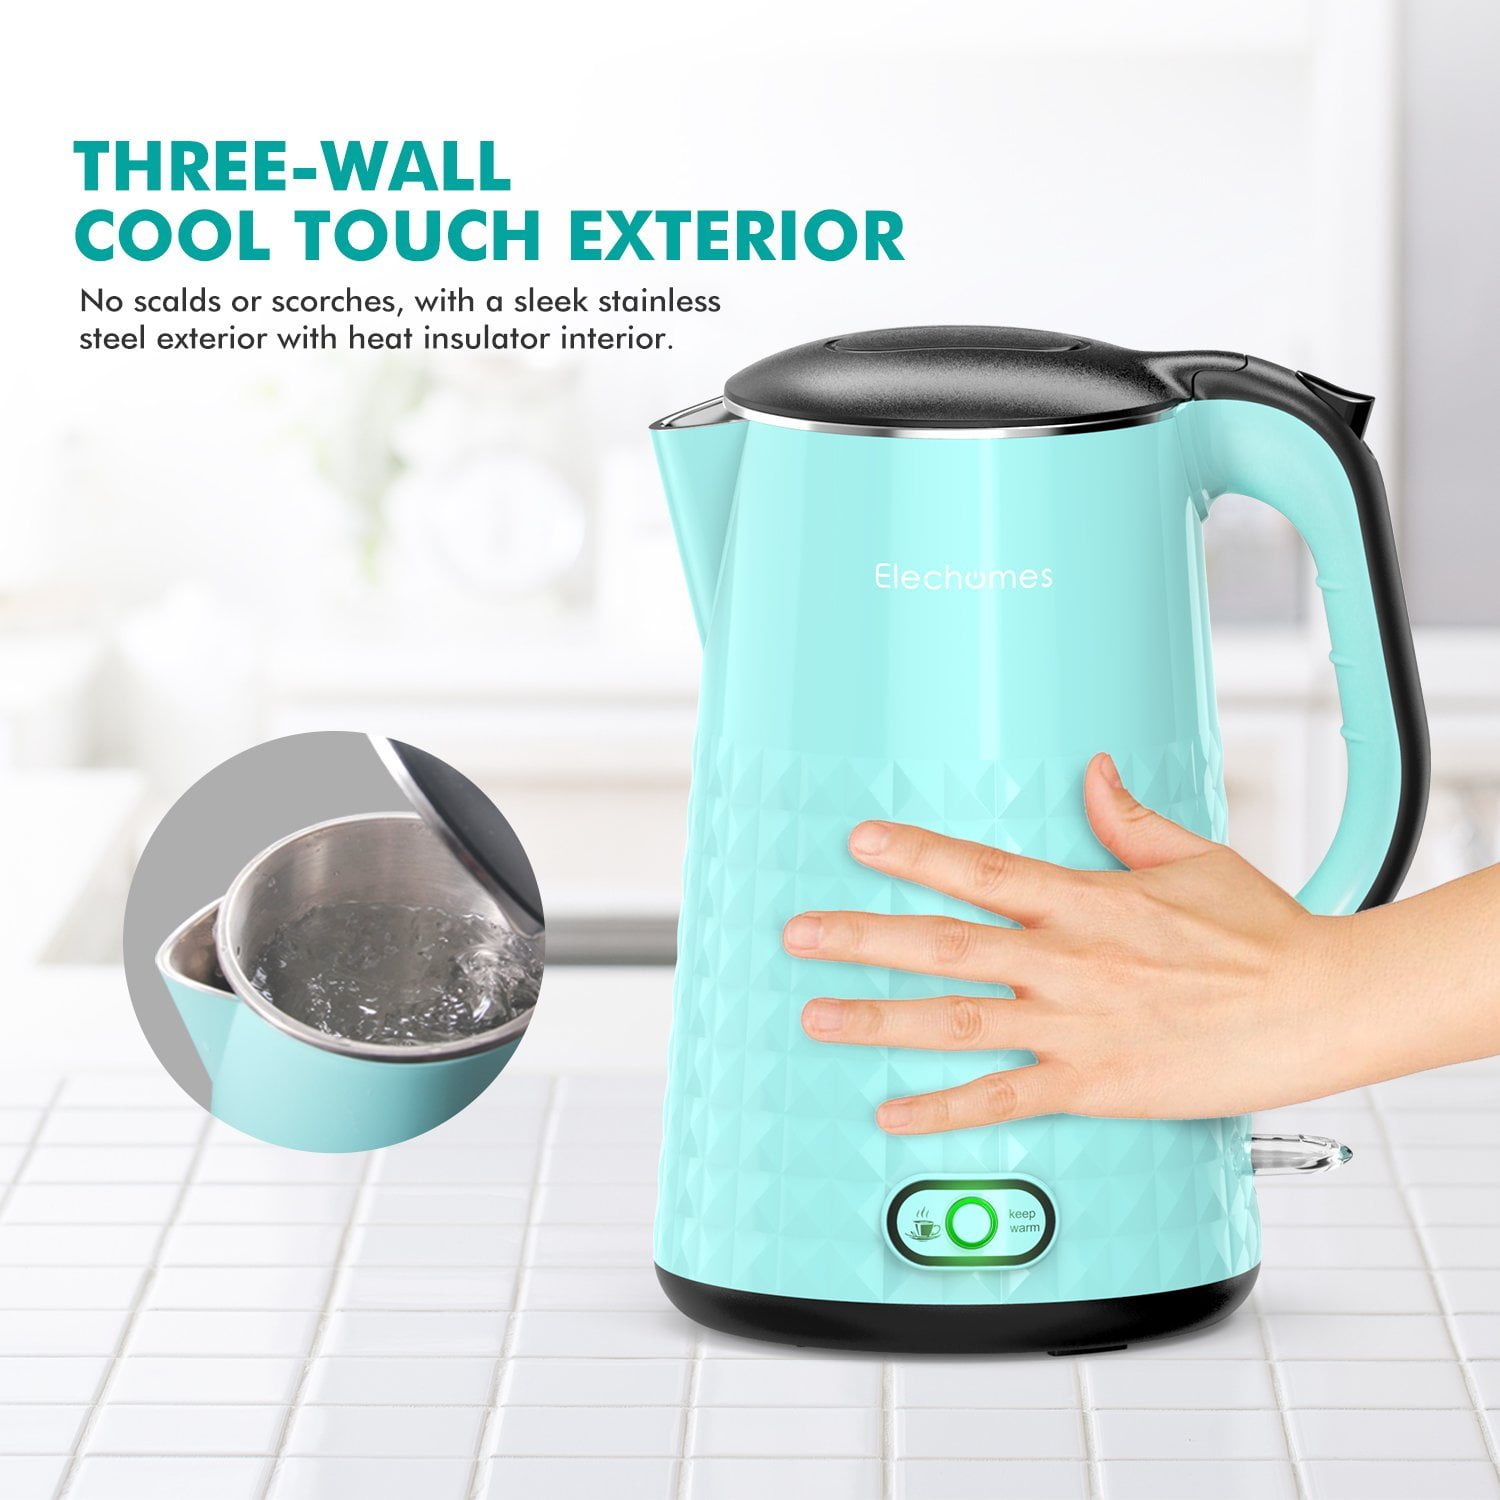 elechomes electric kettle